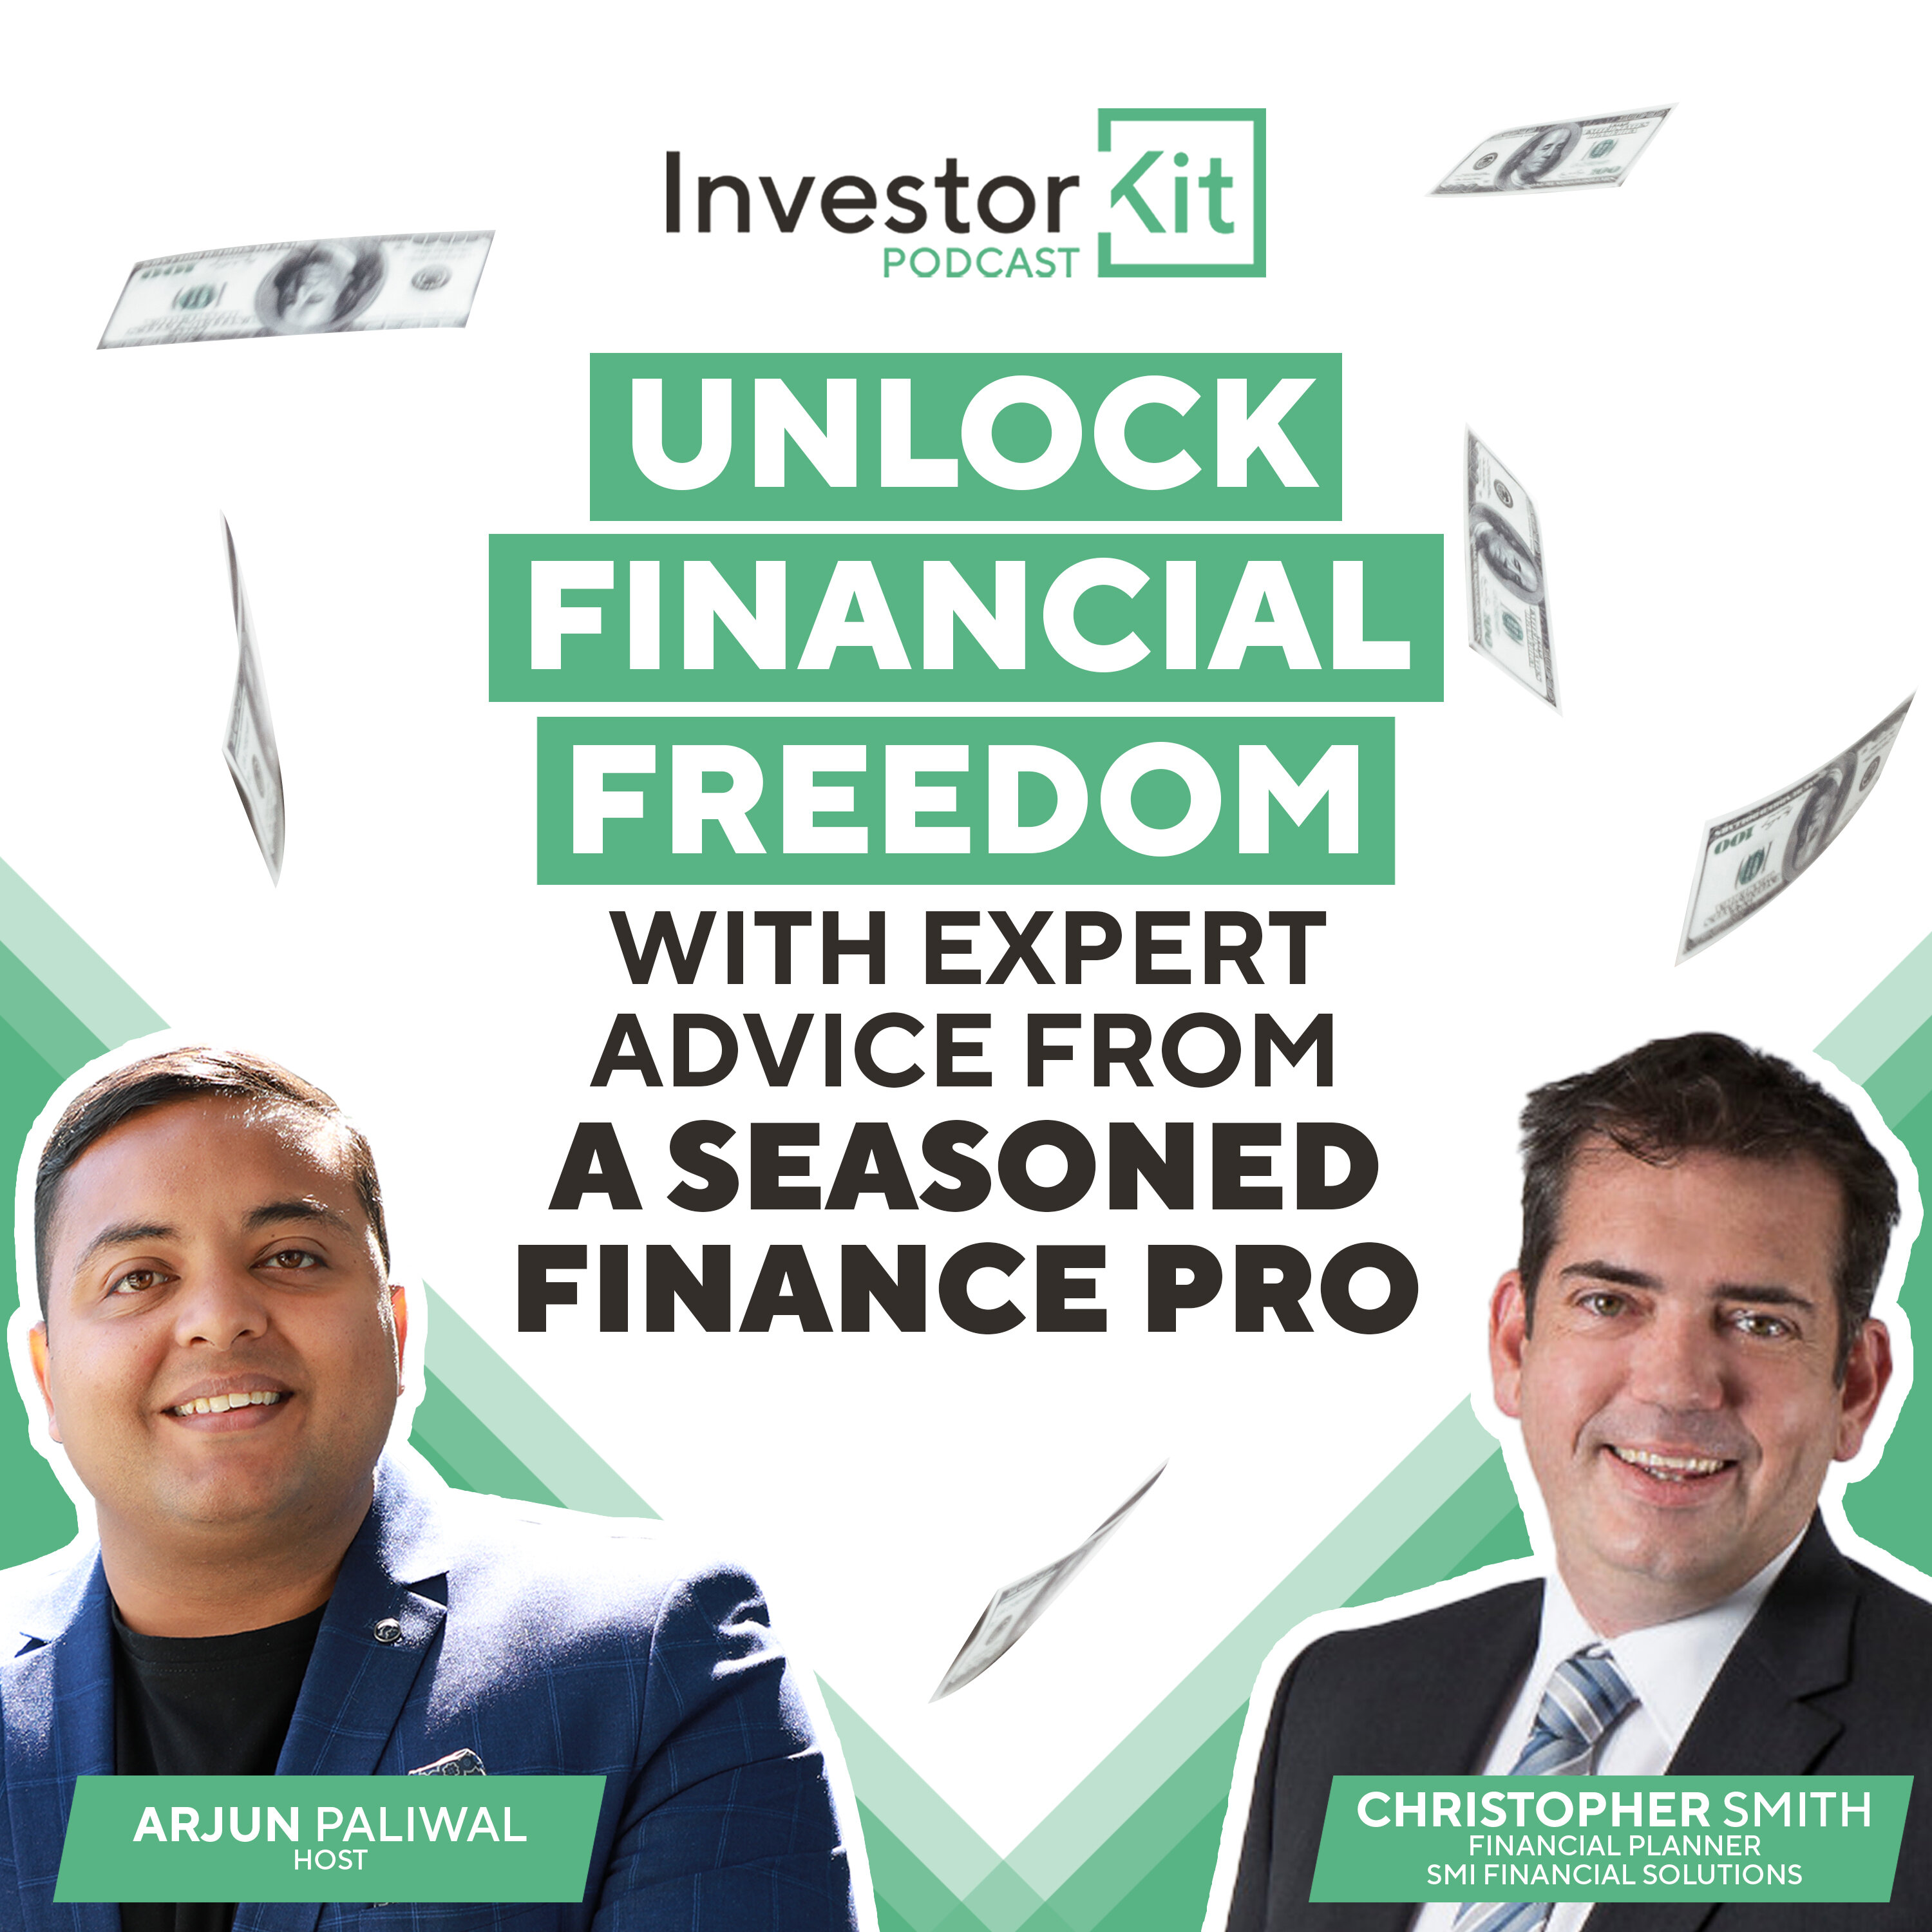 Unlock Financial Freedom with Expert Advice from a Seasoned Finance Pro